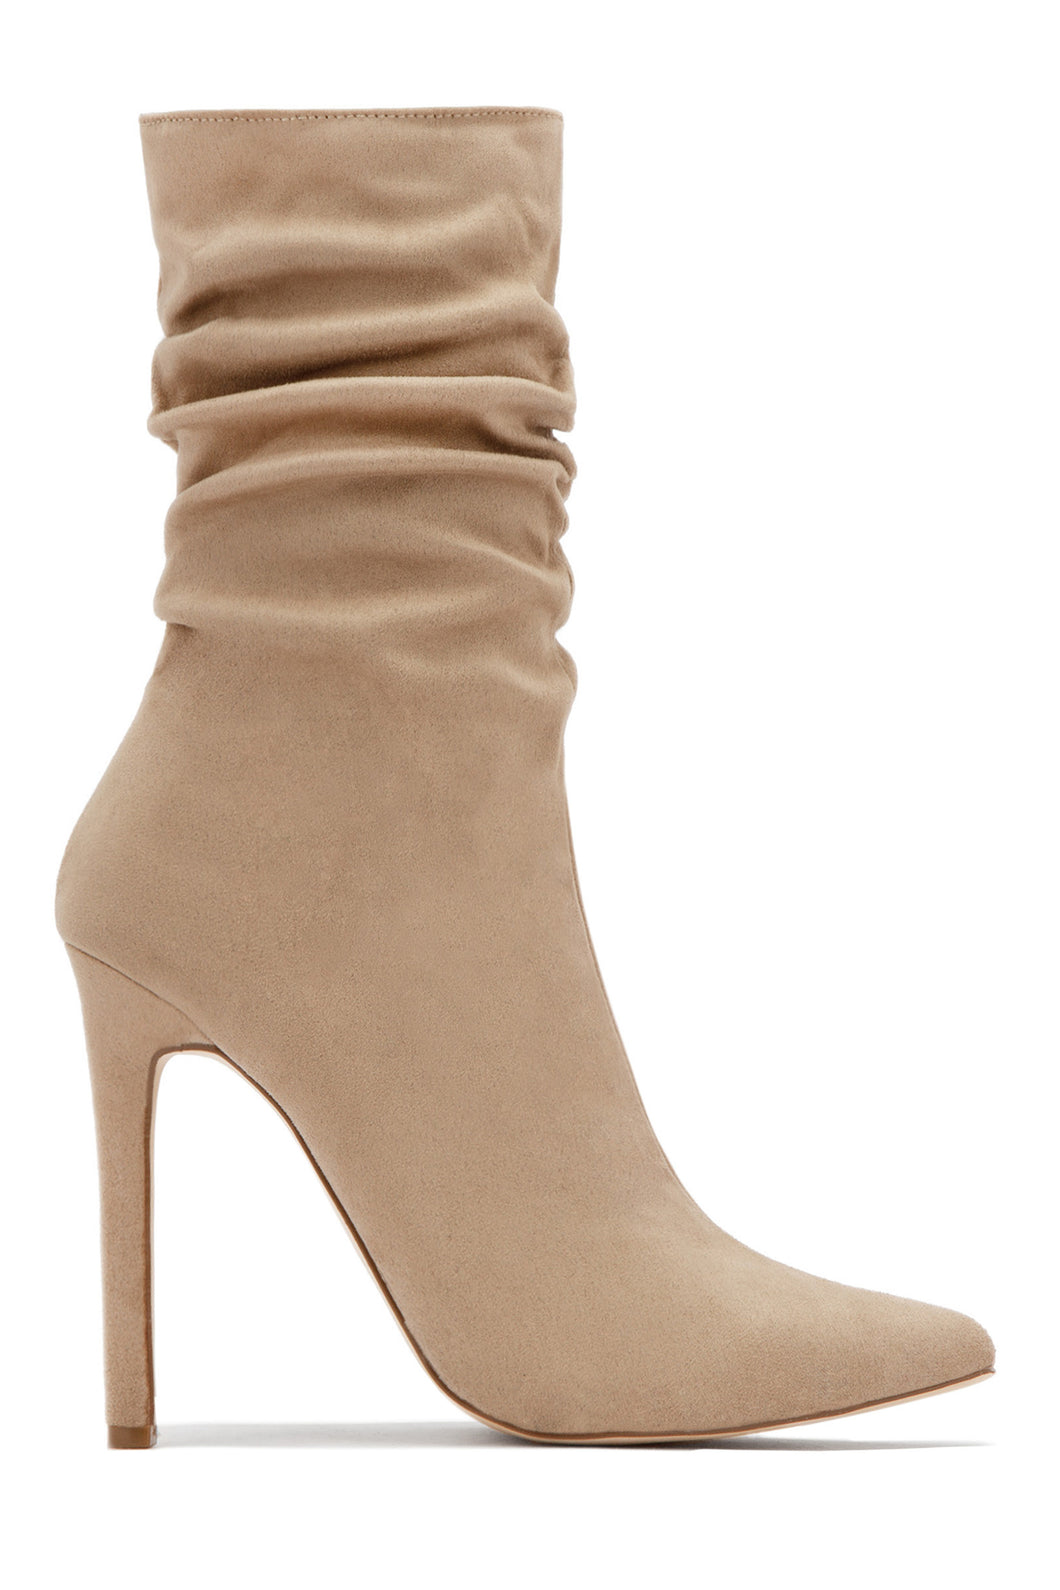 Solemate Ruched Detailed Ankle Heel Boots - Nude